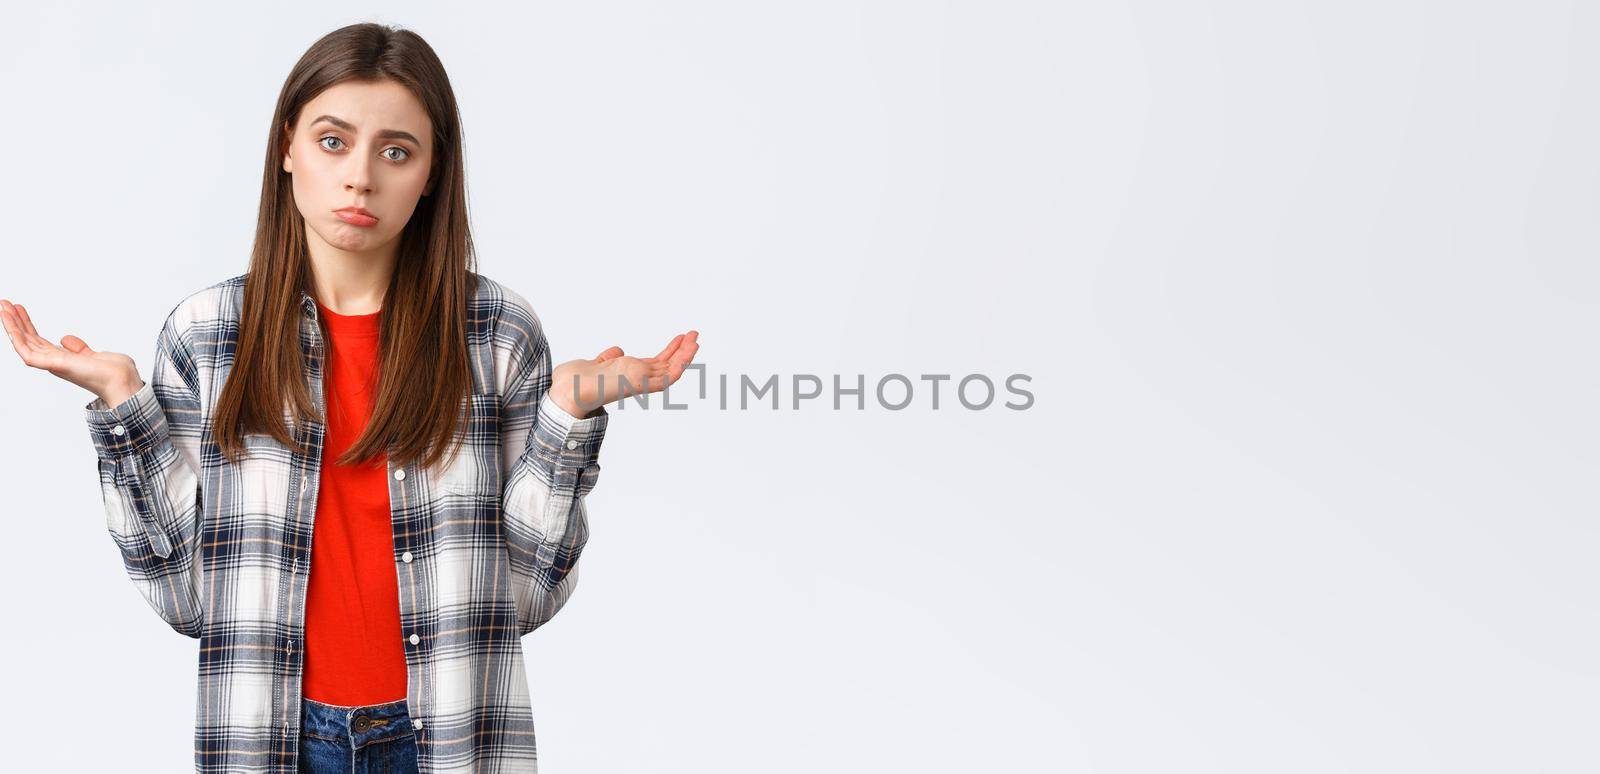 Lifestyle, different emotions, leisure activities concept. Reluctant and careless young woman shrugging with hands spread sideways, dont know, cant help, have no idea, stand white background.